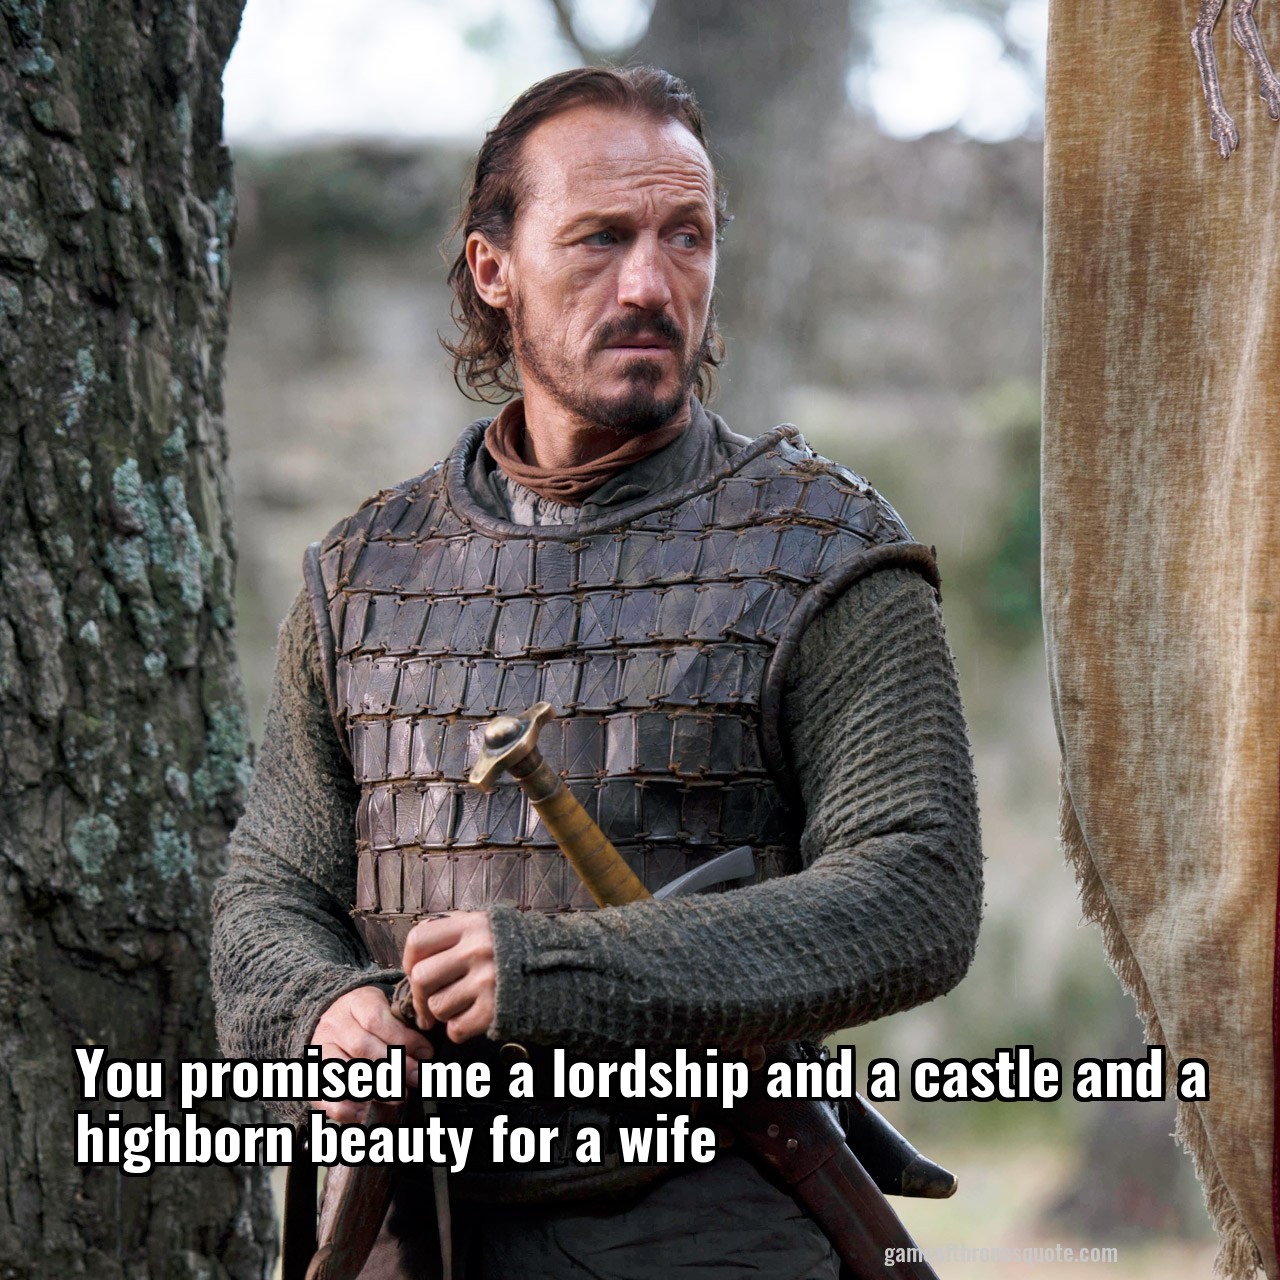 You promised me a lordship and a castle and a highborn beauty for a wife